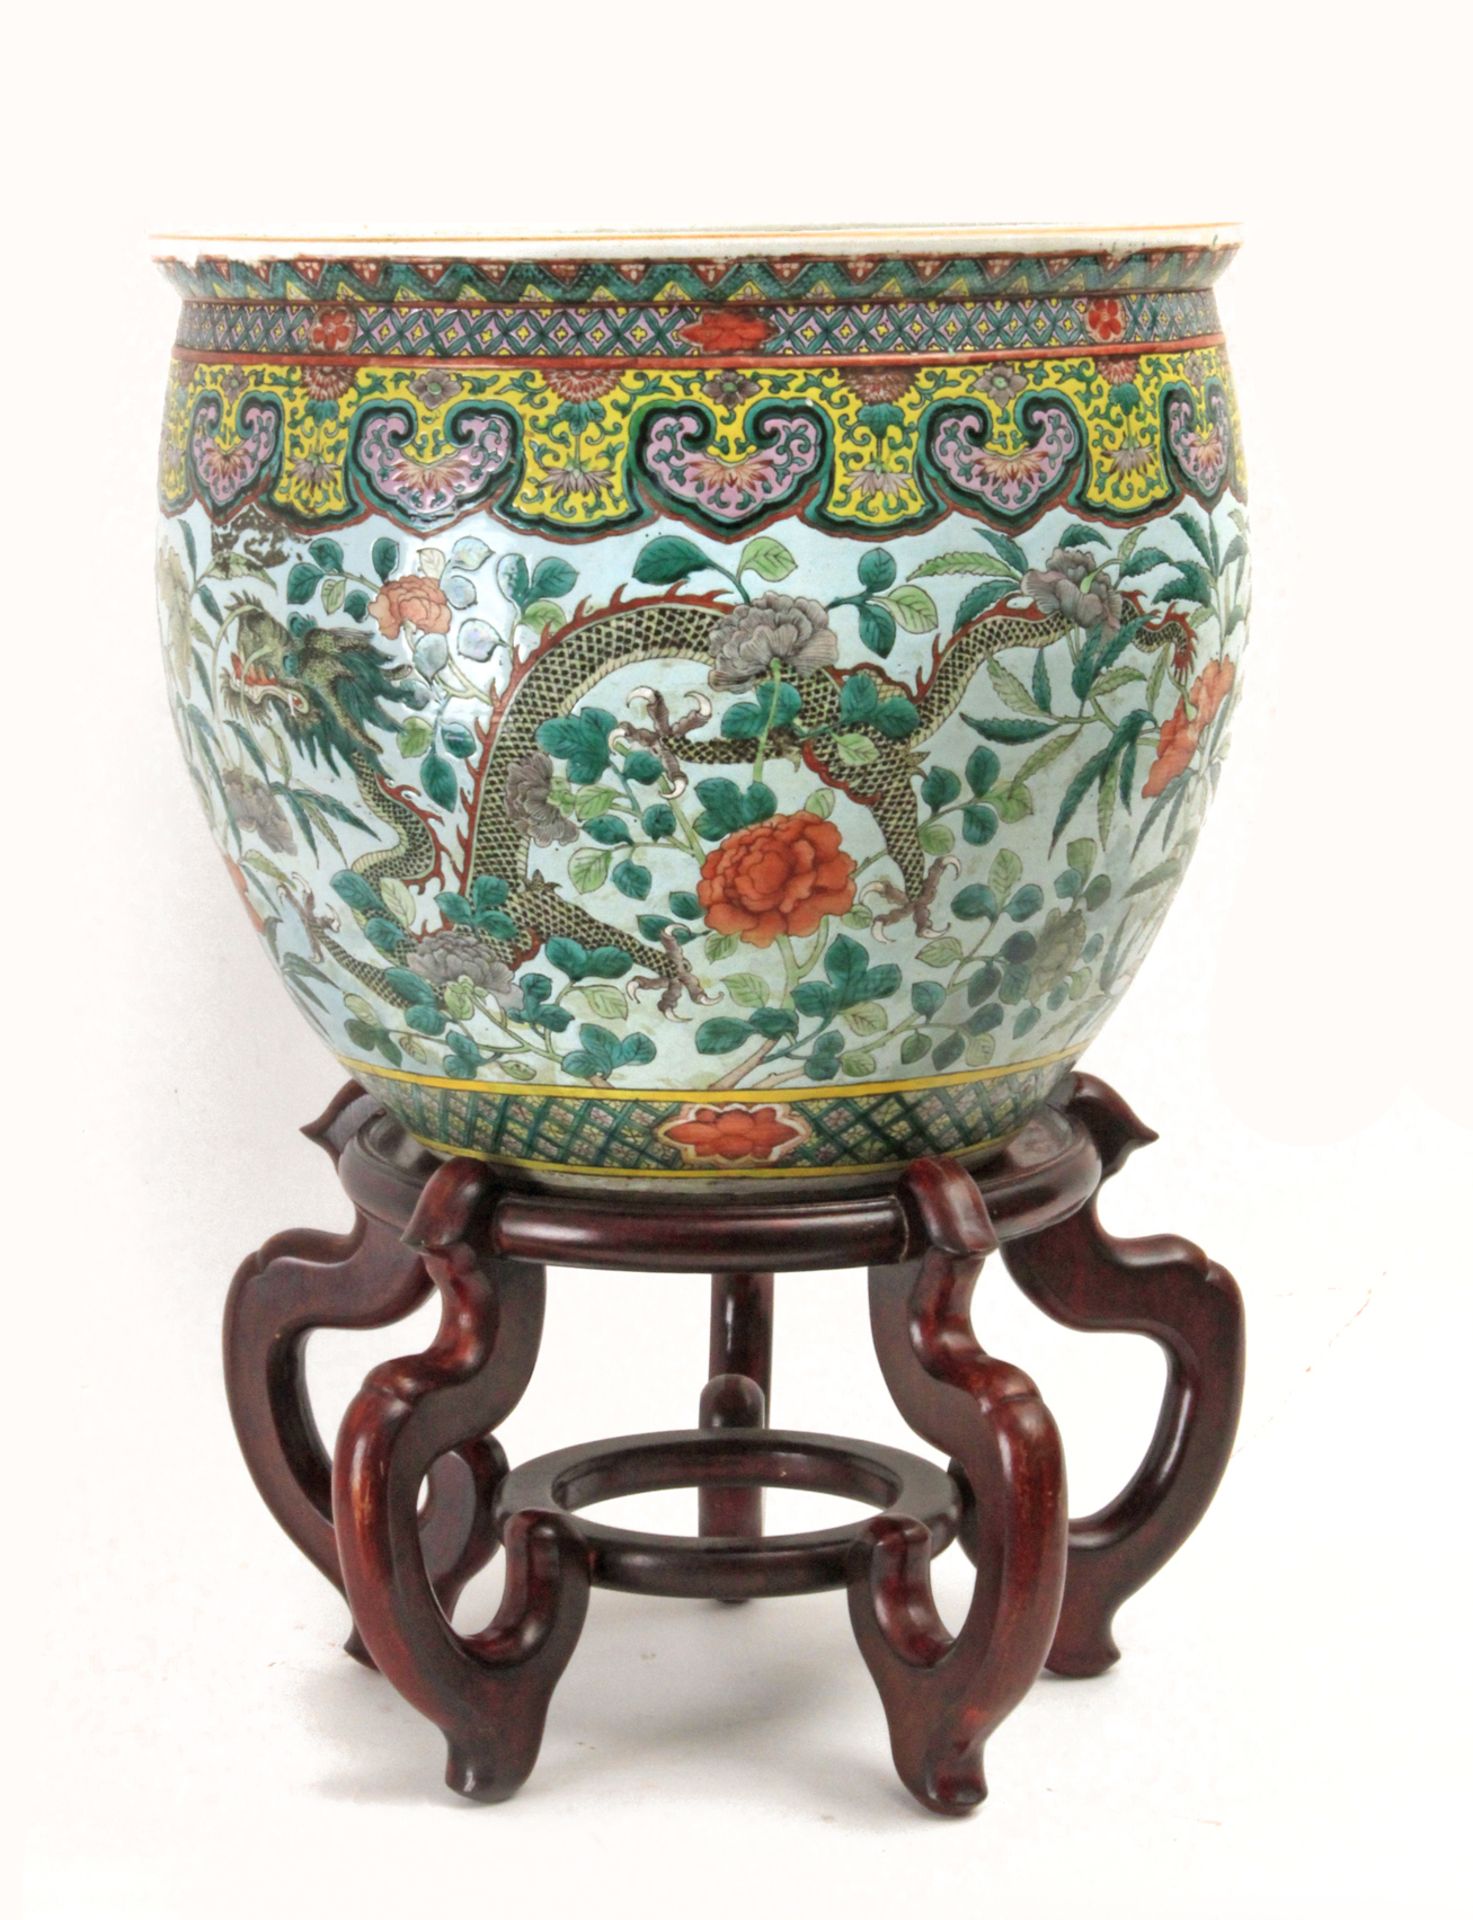 A 19th century Chinese cache-pot in Famille Rose porcelain